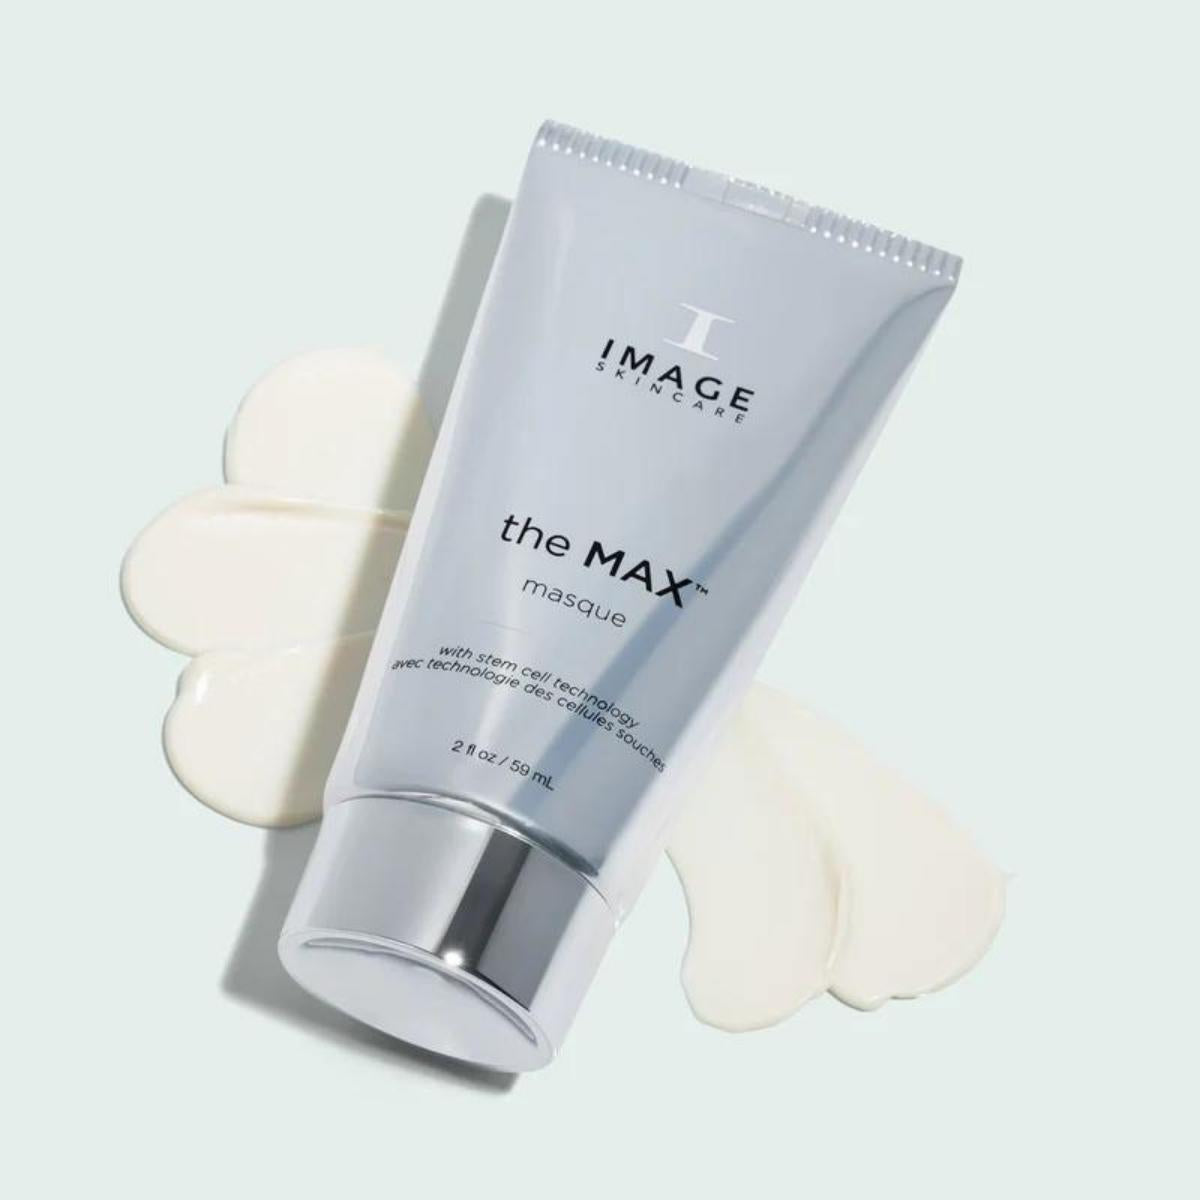 IMAGE Skincare The MAX Stem Cell Masque